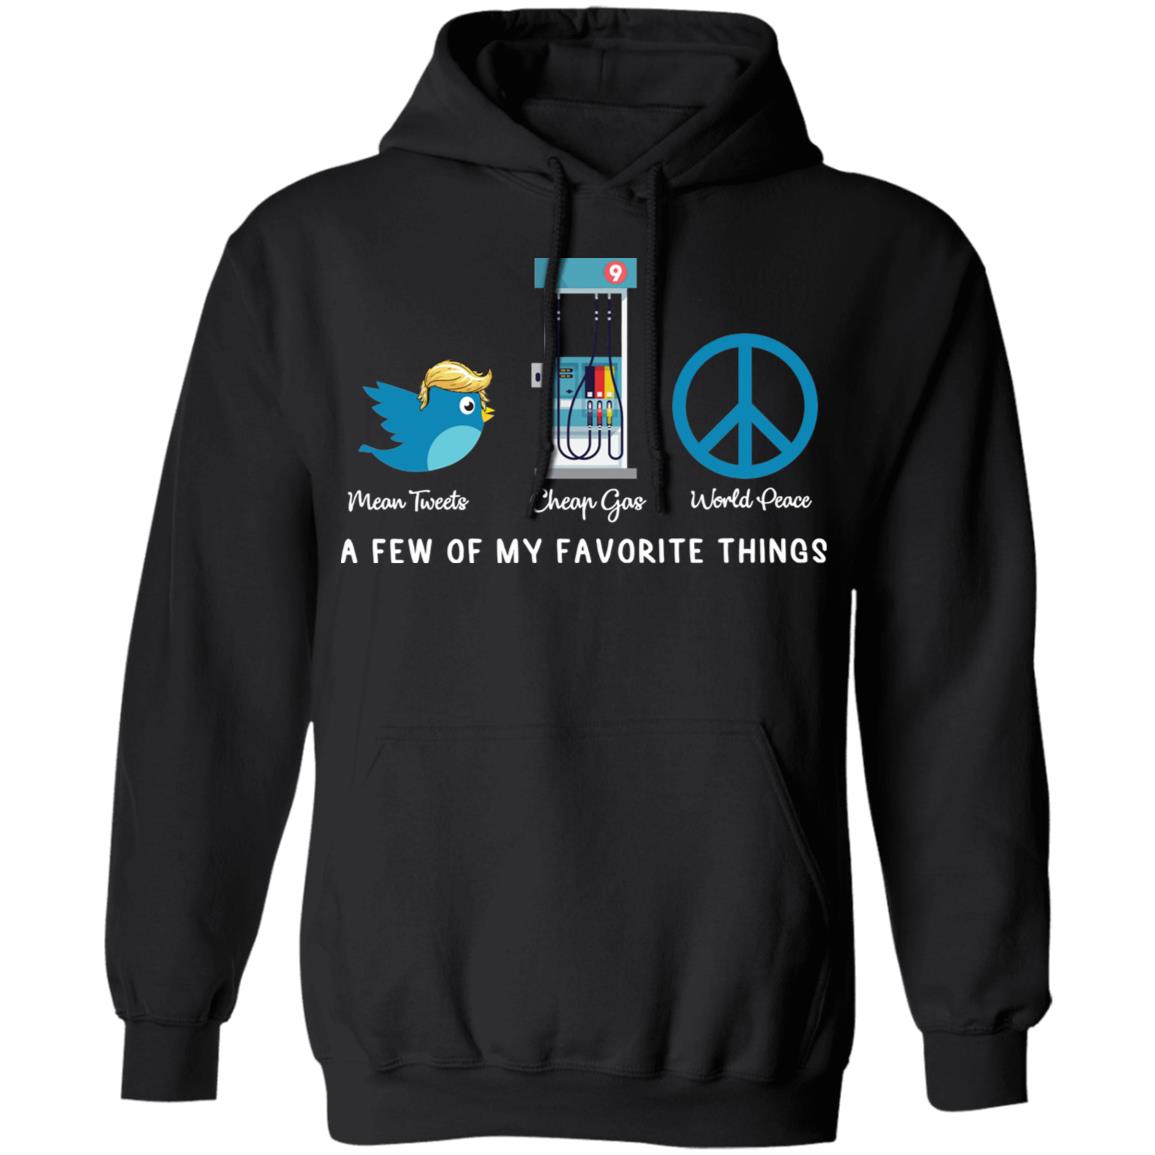 Mean Tweets Cheap Gas World Peace A Few Of My Favorite Things Trump Shirt 1